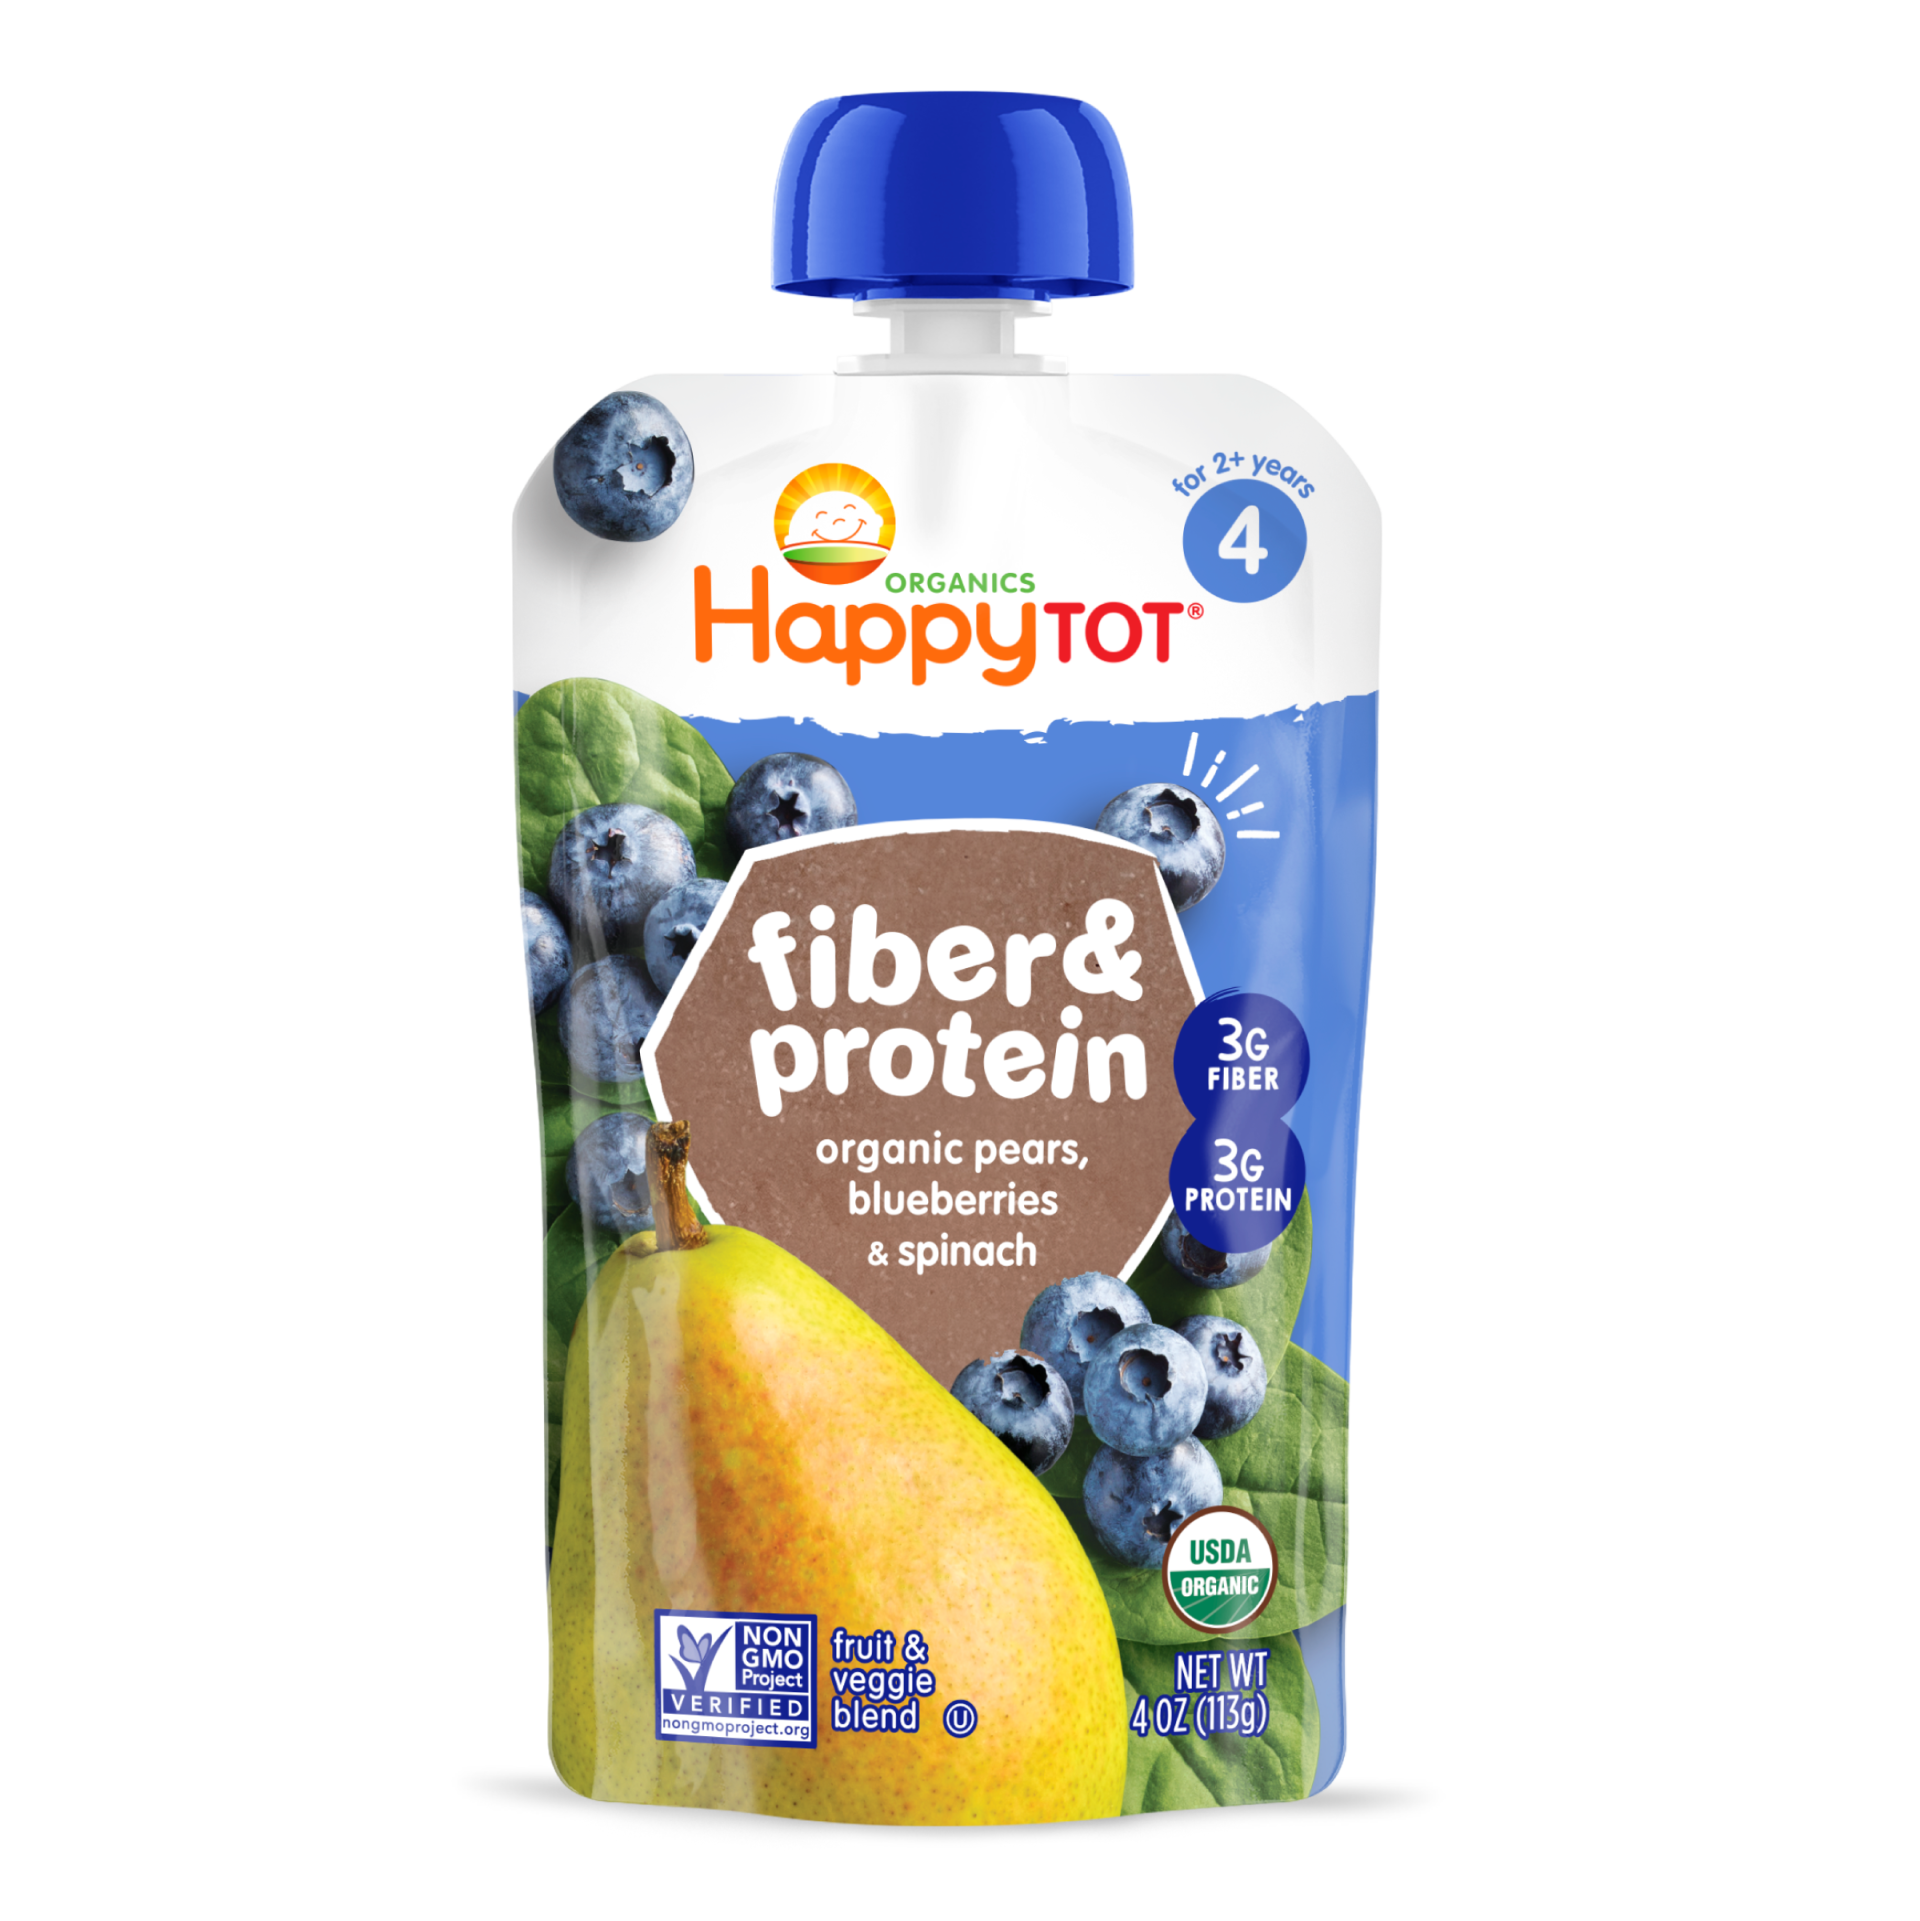 Happy Tot Fiber & Protein Stage 4 Pears, Blueberries & Spinach Pouch 16 units per case 4.0 oz